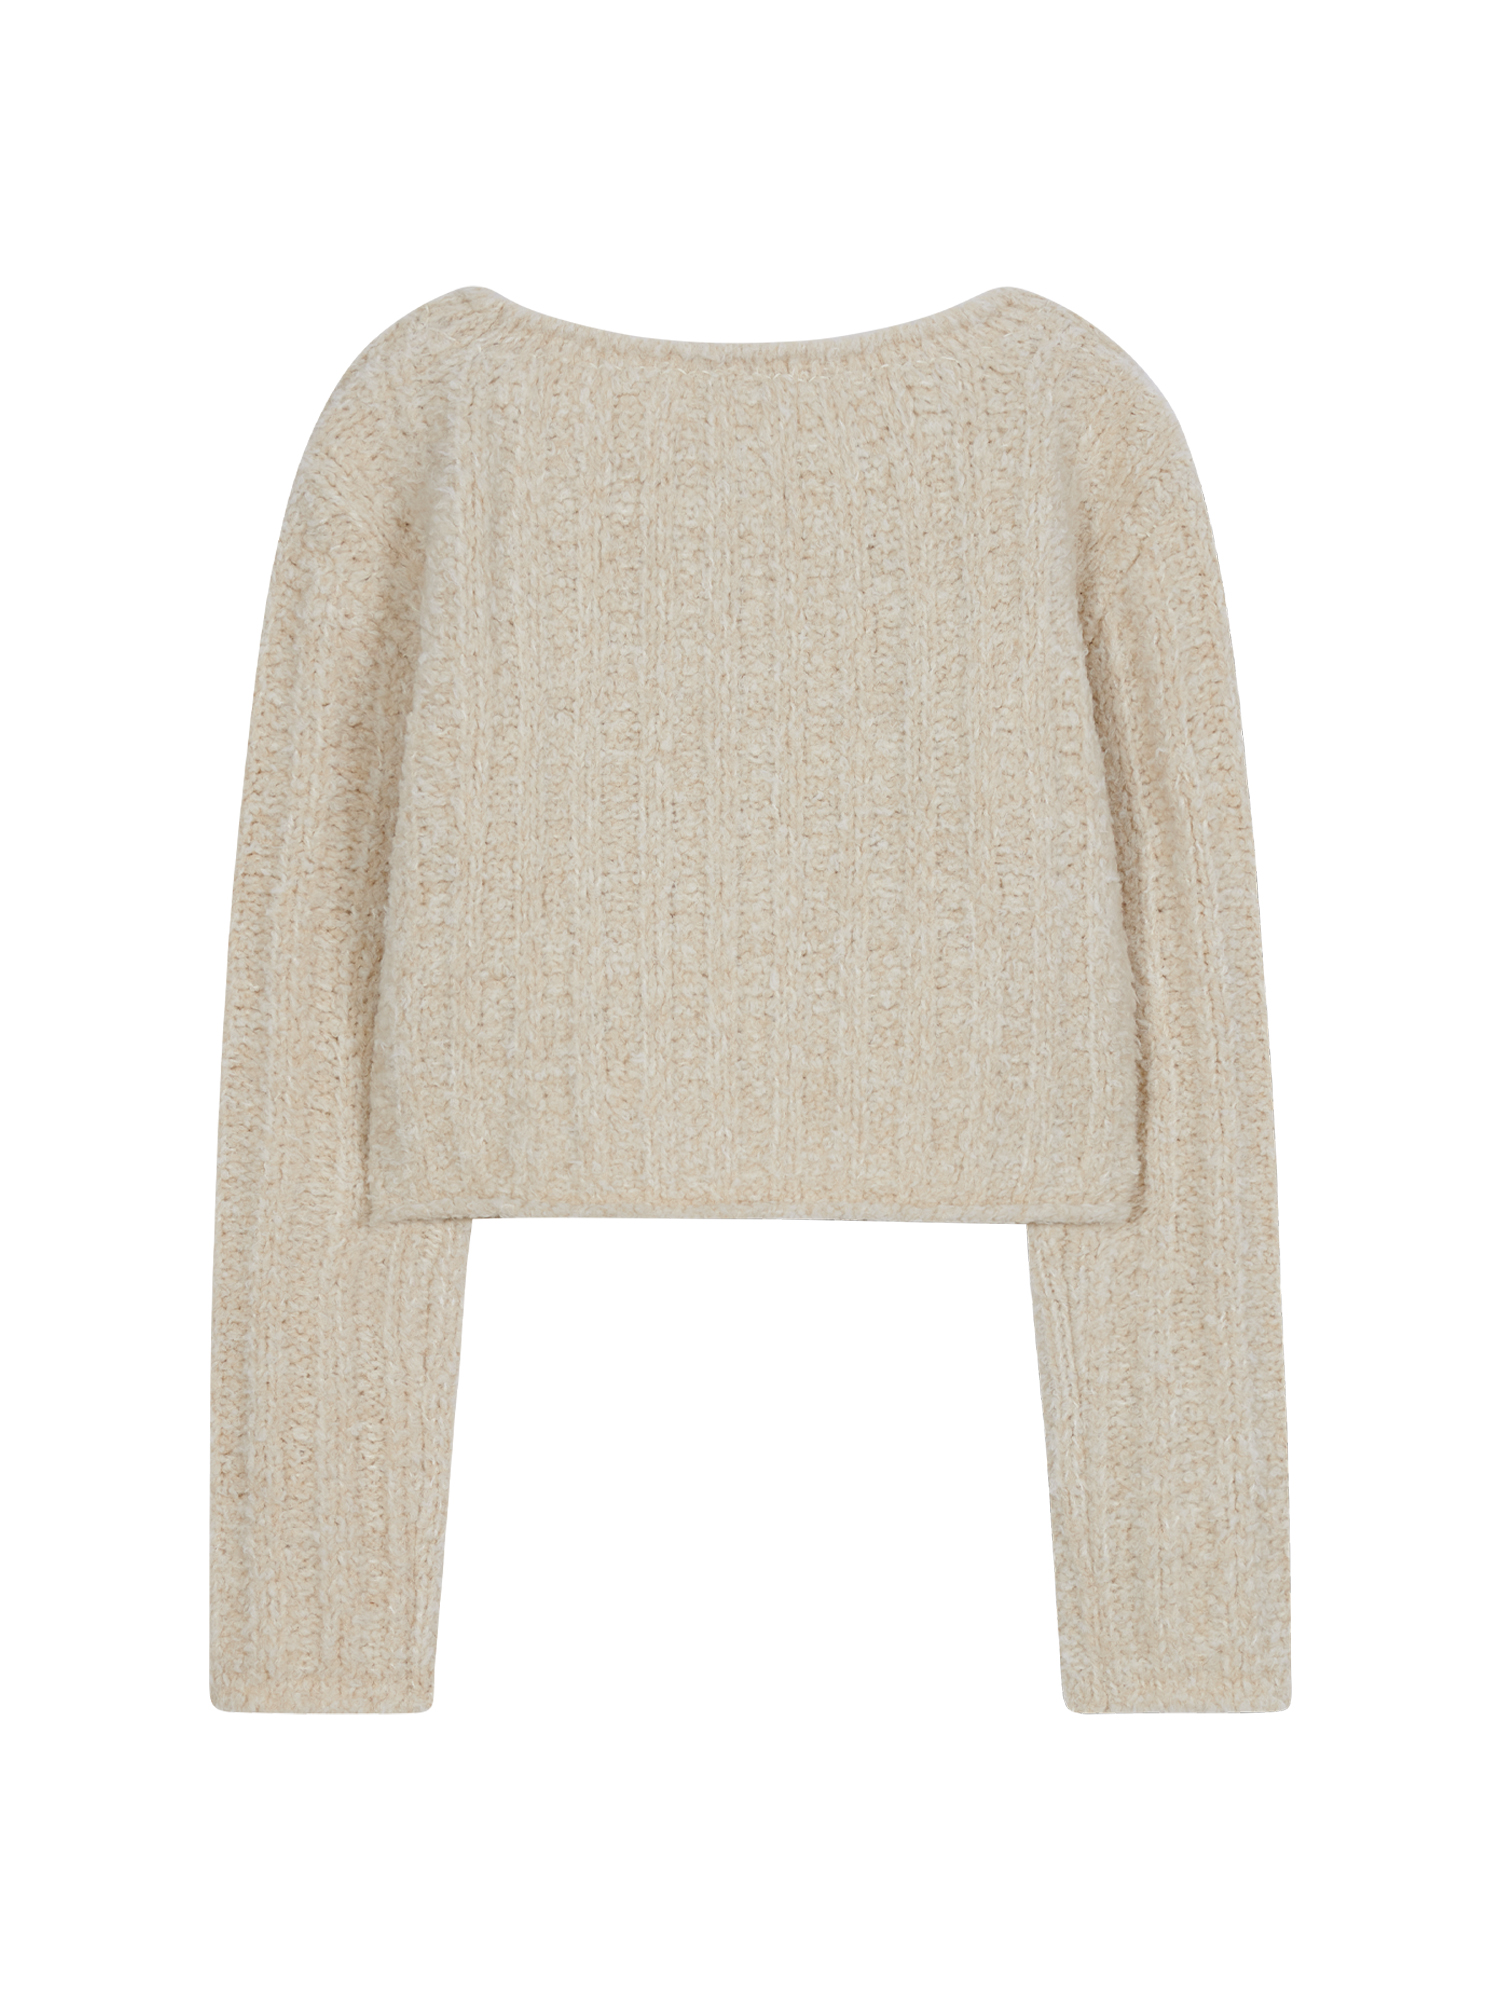 One Off Shoulder Boucle Knit - Oatmeal